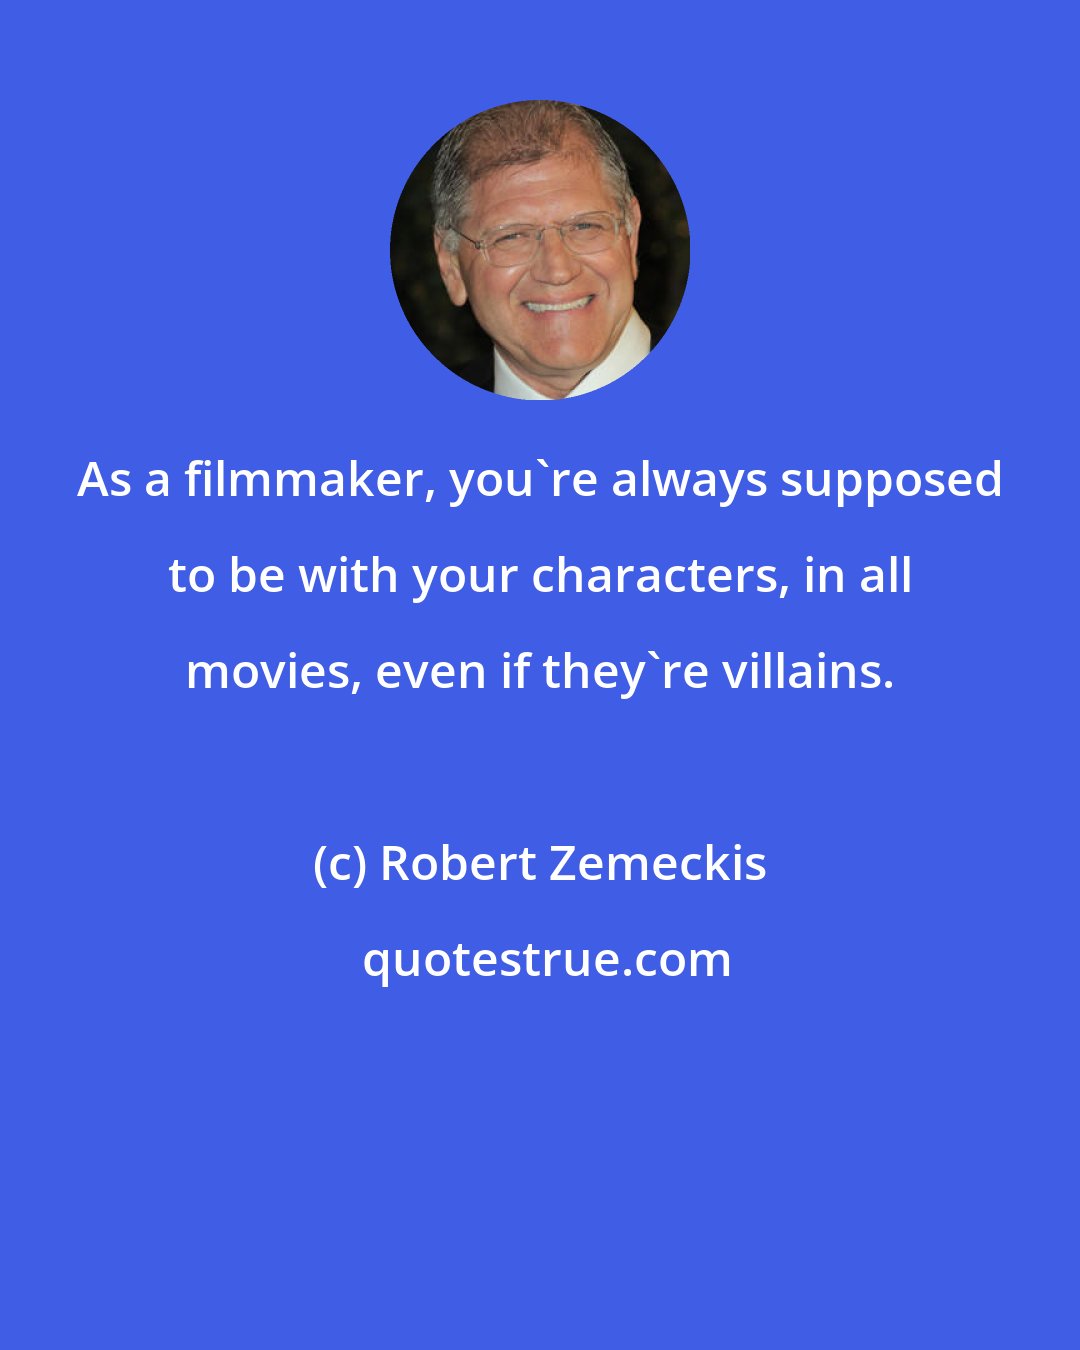 Robert Zemeckis: As a filmmaker, you're always supposed to be with your characters, in all movies, even if they're villains.